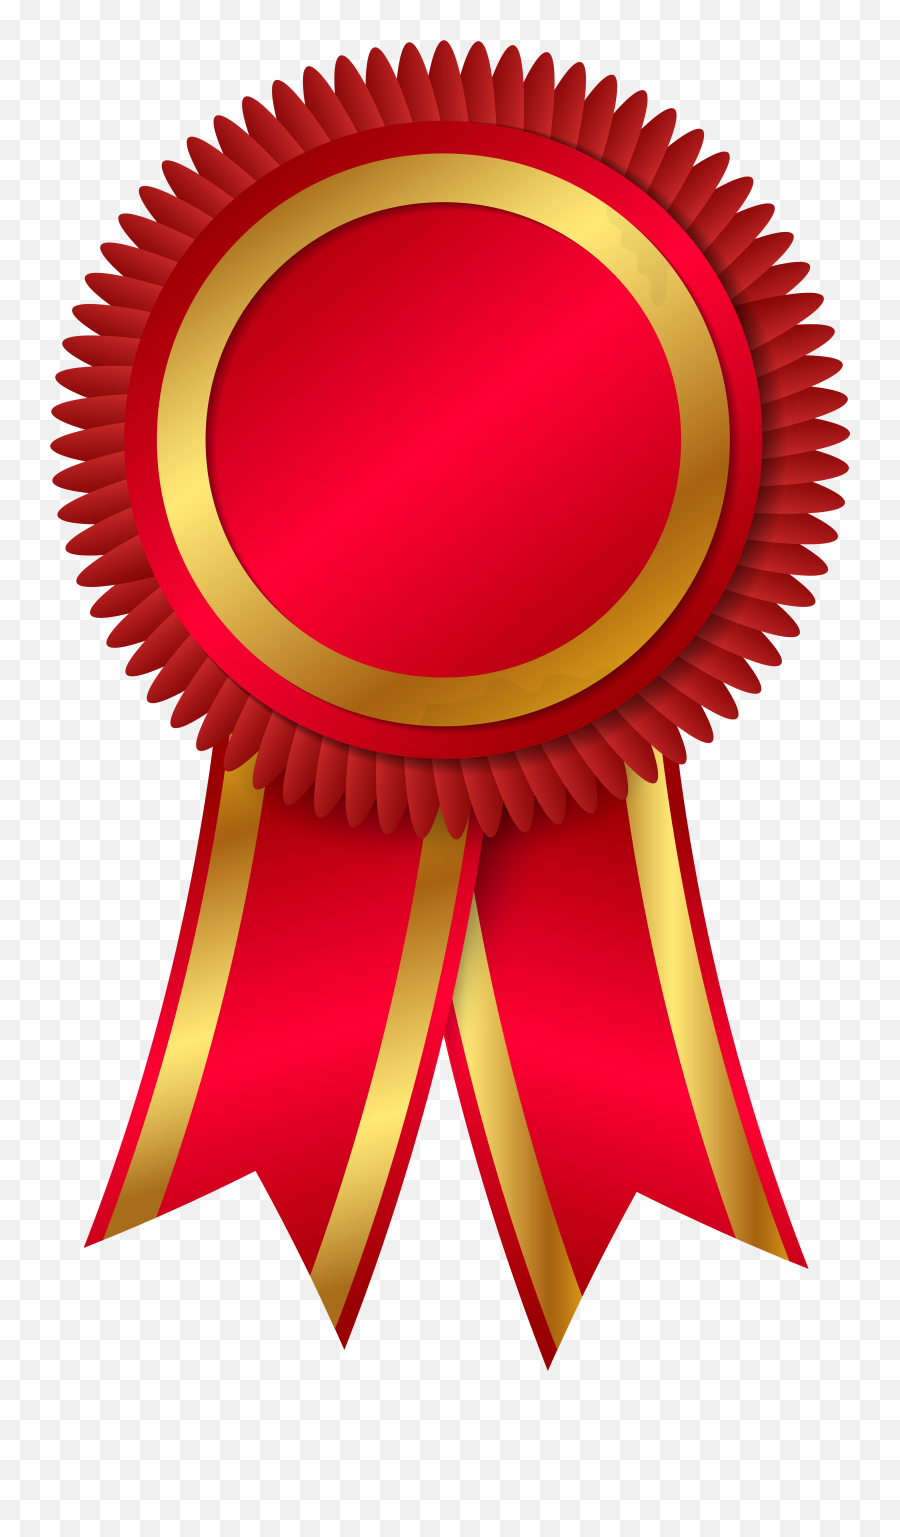 Download Golden Ribbon Rosette Award Cup Png Image High - Award Ribbon Transparent Background,Red Cup Png